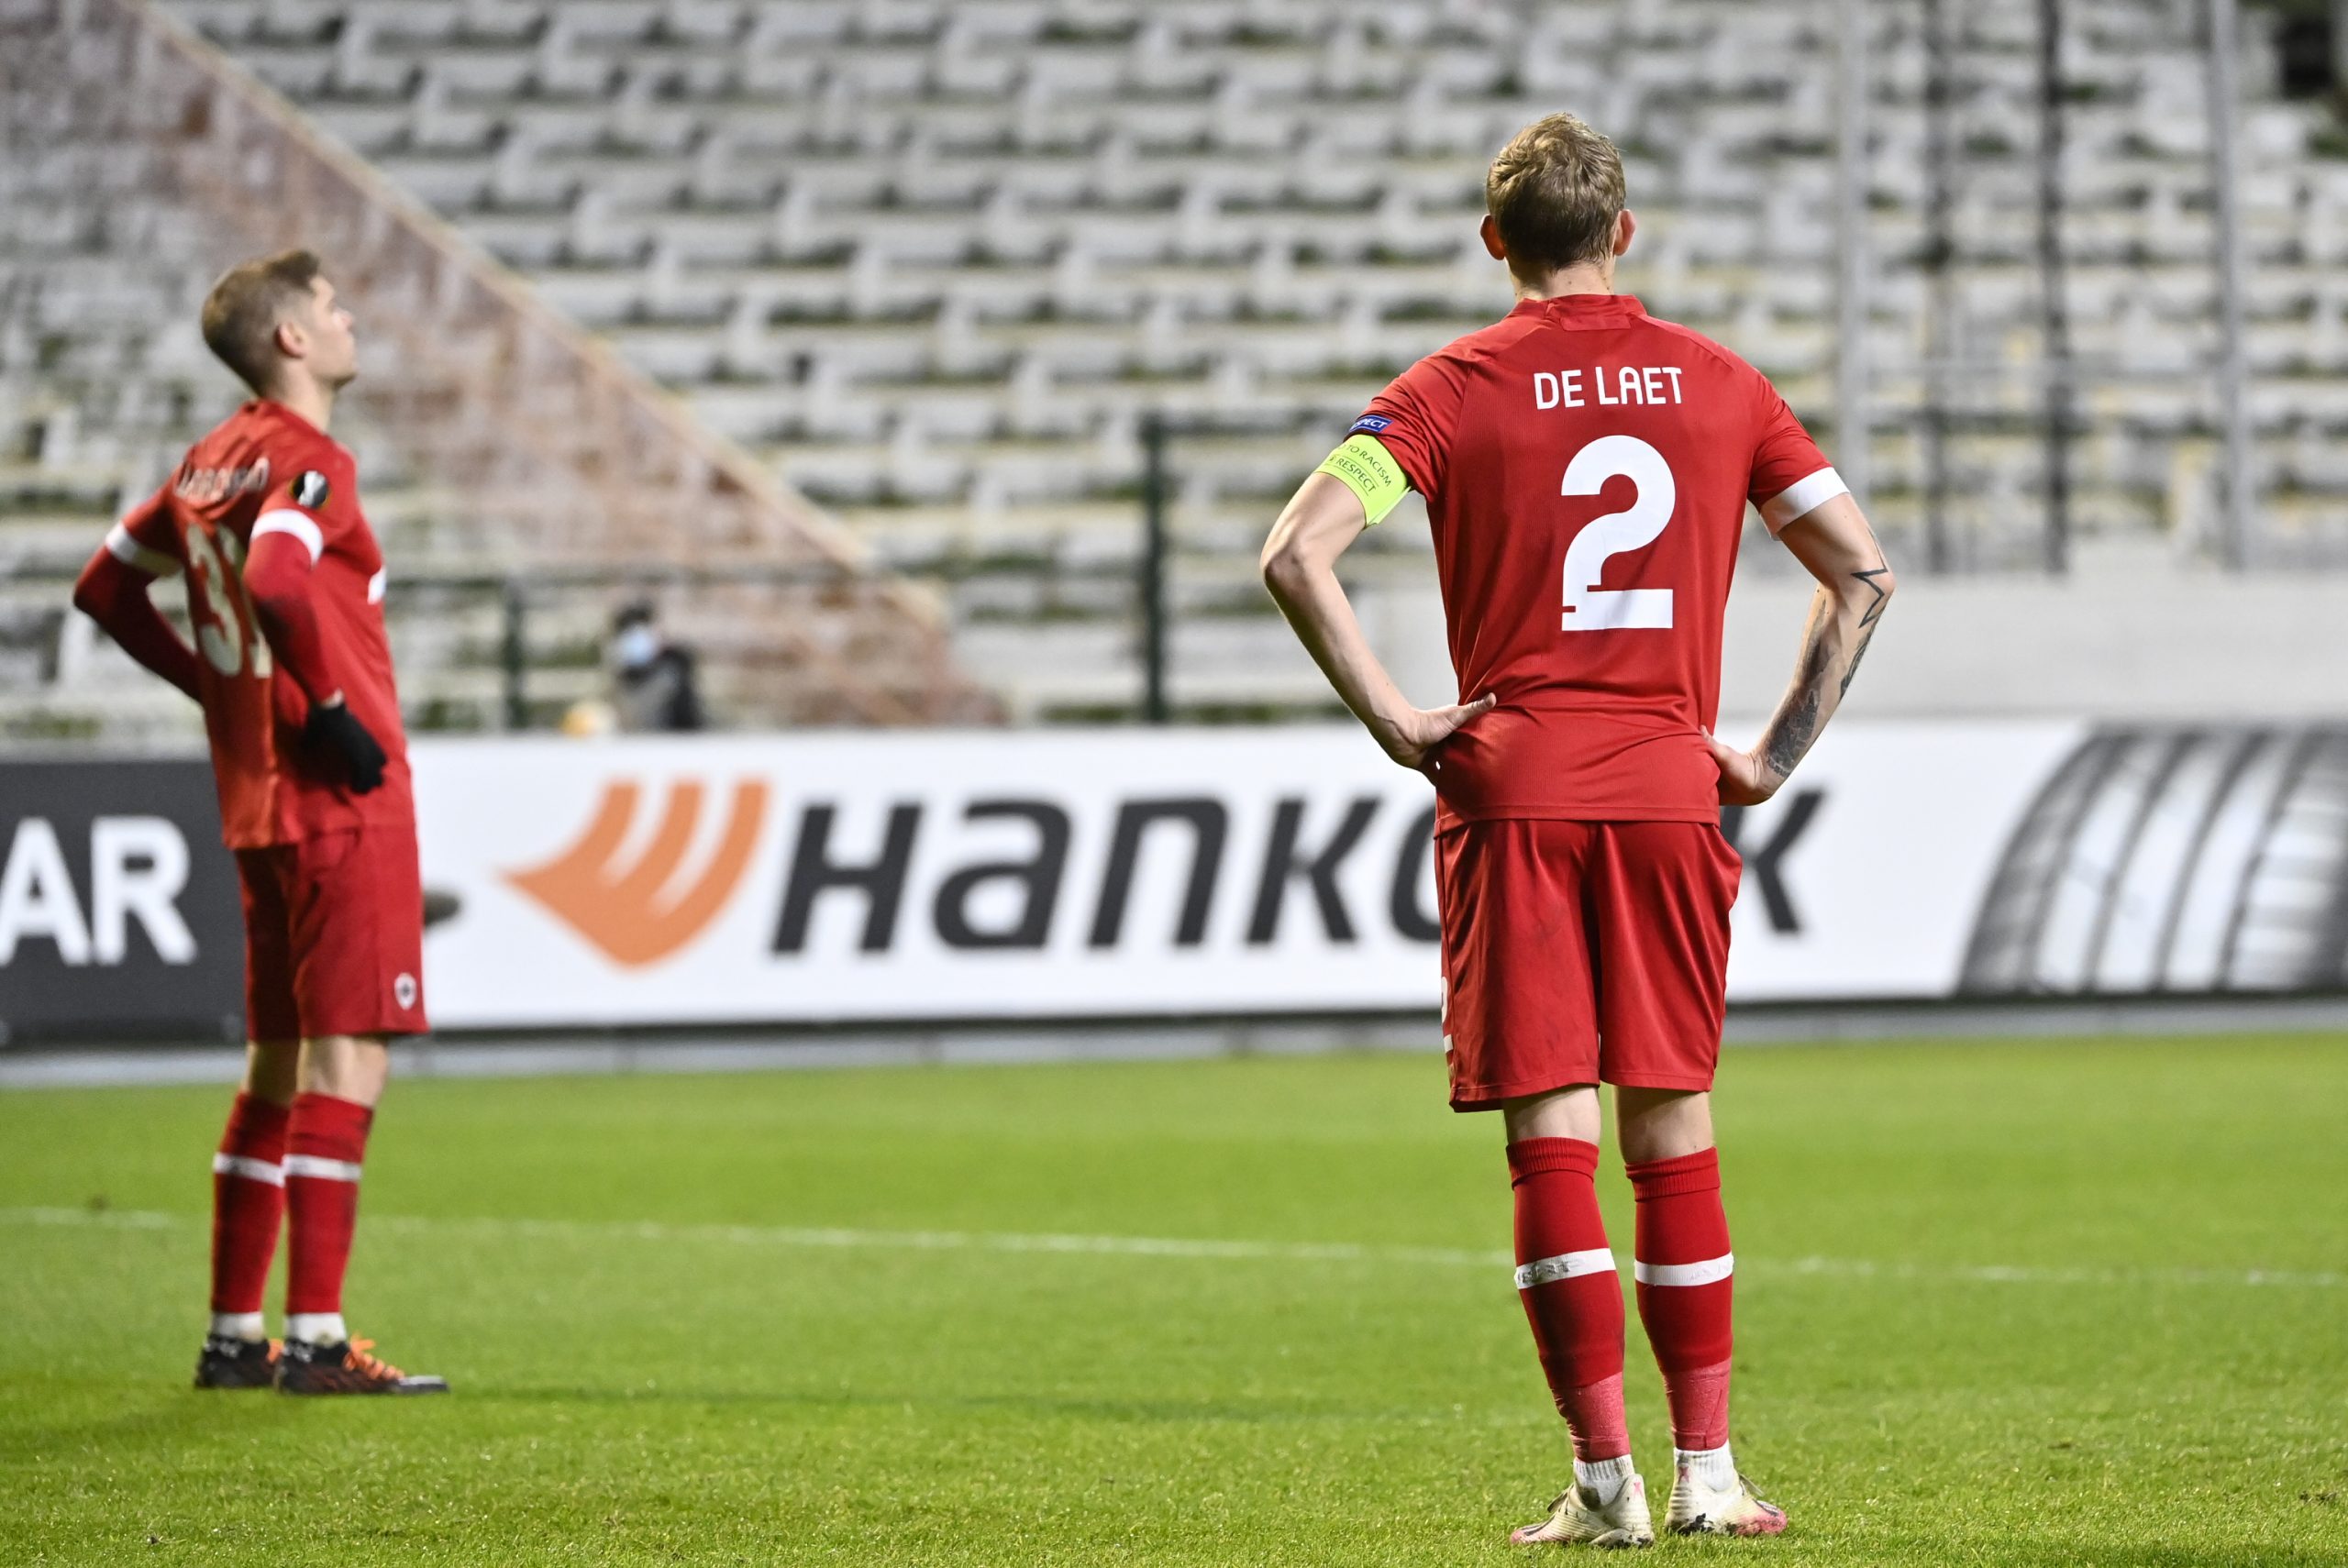 Antwerp's Ritchie De Laet shows dejection after losing a soccer game between Belgian club Royal Antwerp FC and Scottish Rangers F.C., Thursday 18 February 2021 in Antwerp, the first leg of the 1/16 finals of the UEFA Europa League competition. BELGA PHOTO DIRK WAEM